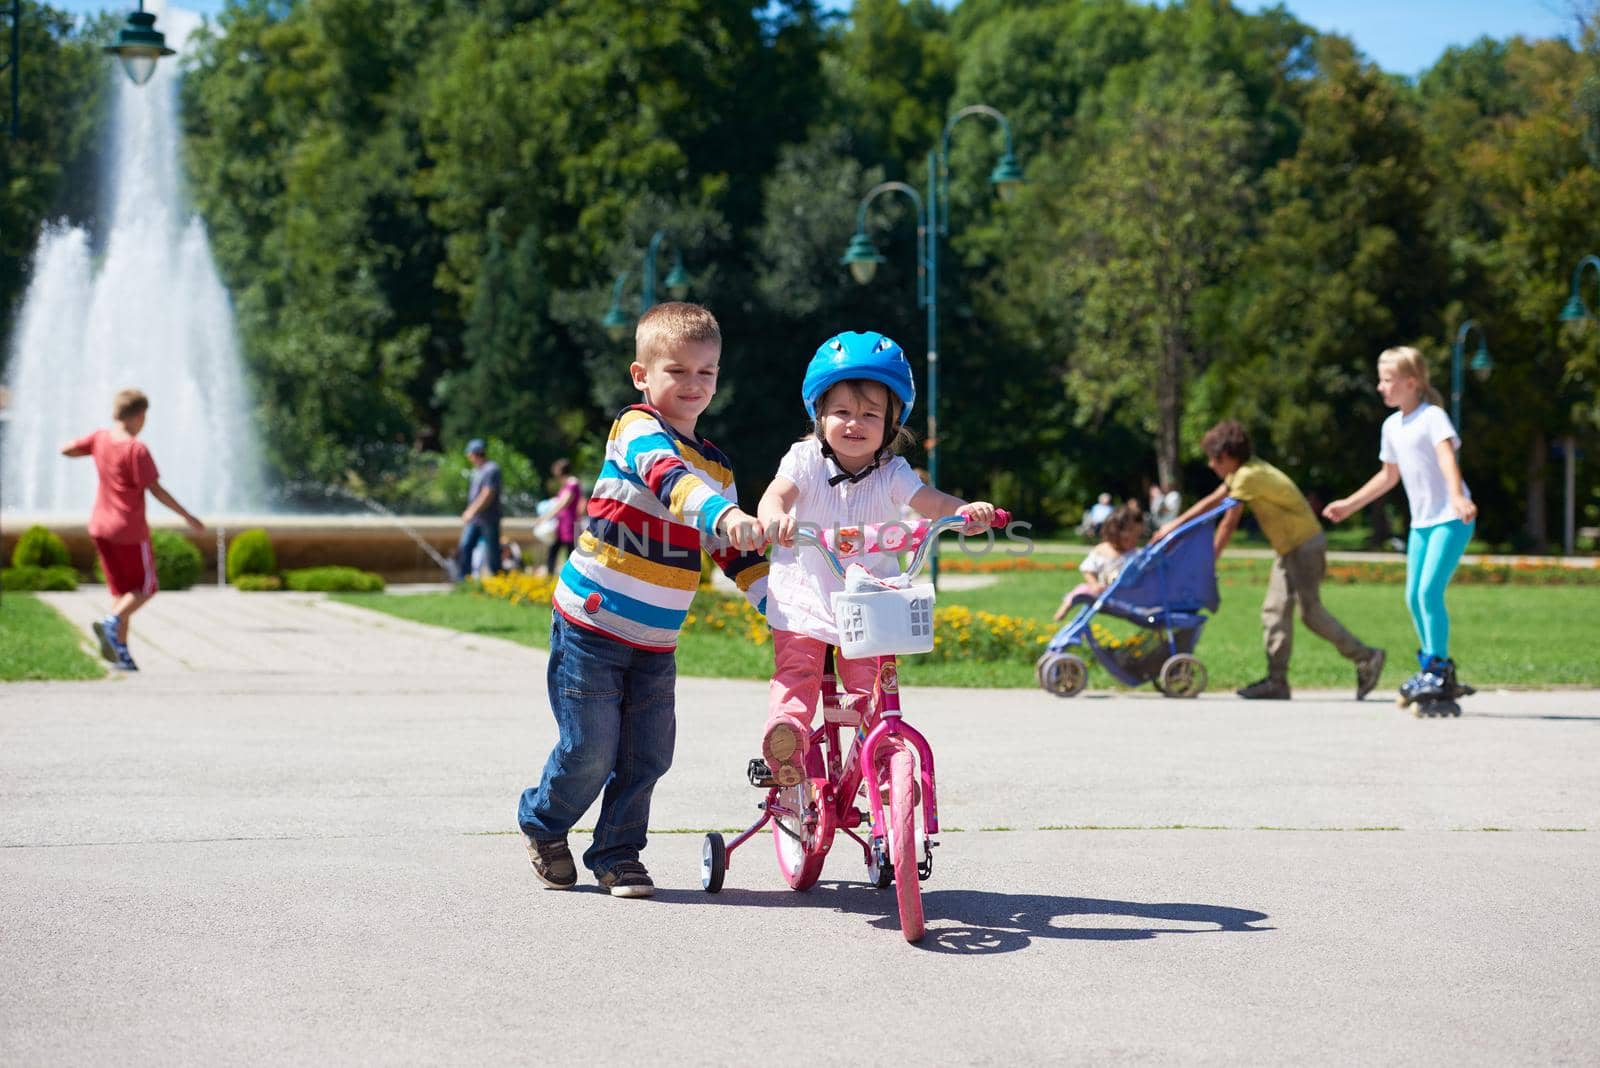 Happy childrens outdoor,  brother and sister in park have fun. Boy and girl in park learning to ride a bike.